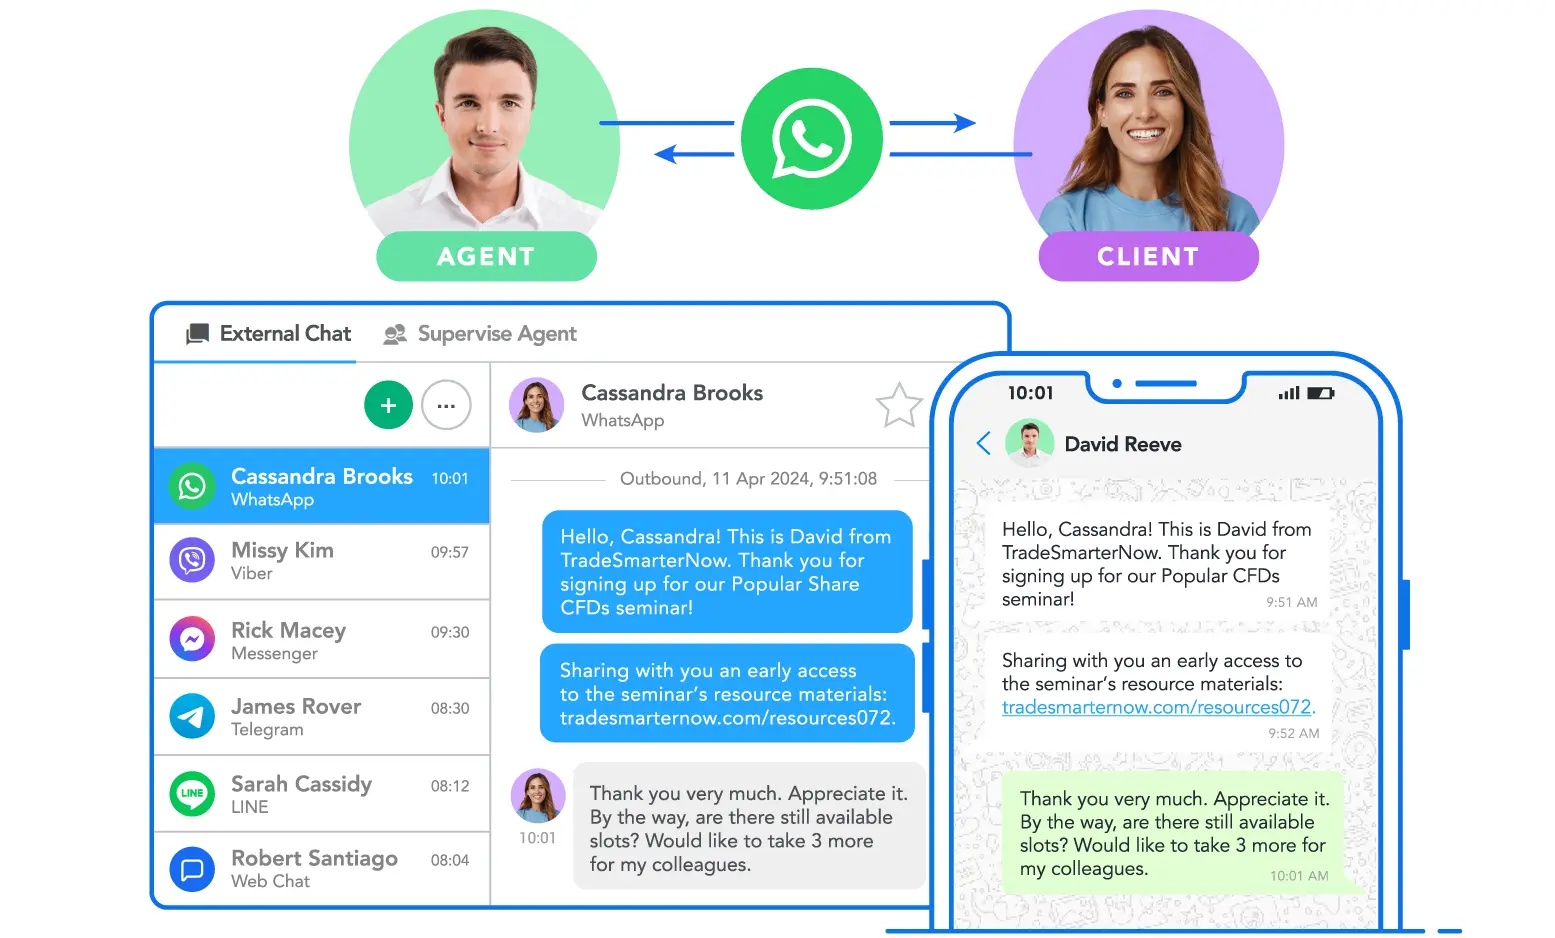 An agent initiating a conversation with a prospect or customer using Proactive Outbound Messaging via WhatsApp or SMS.